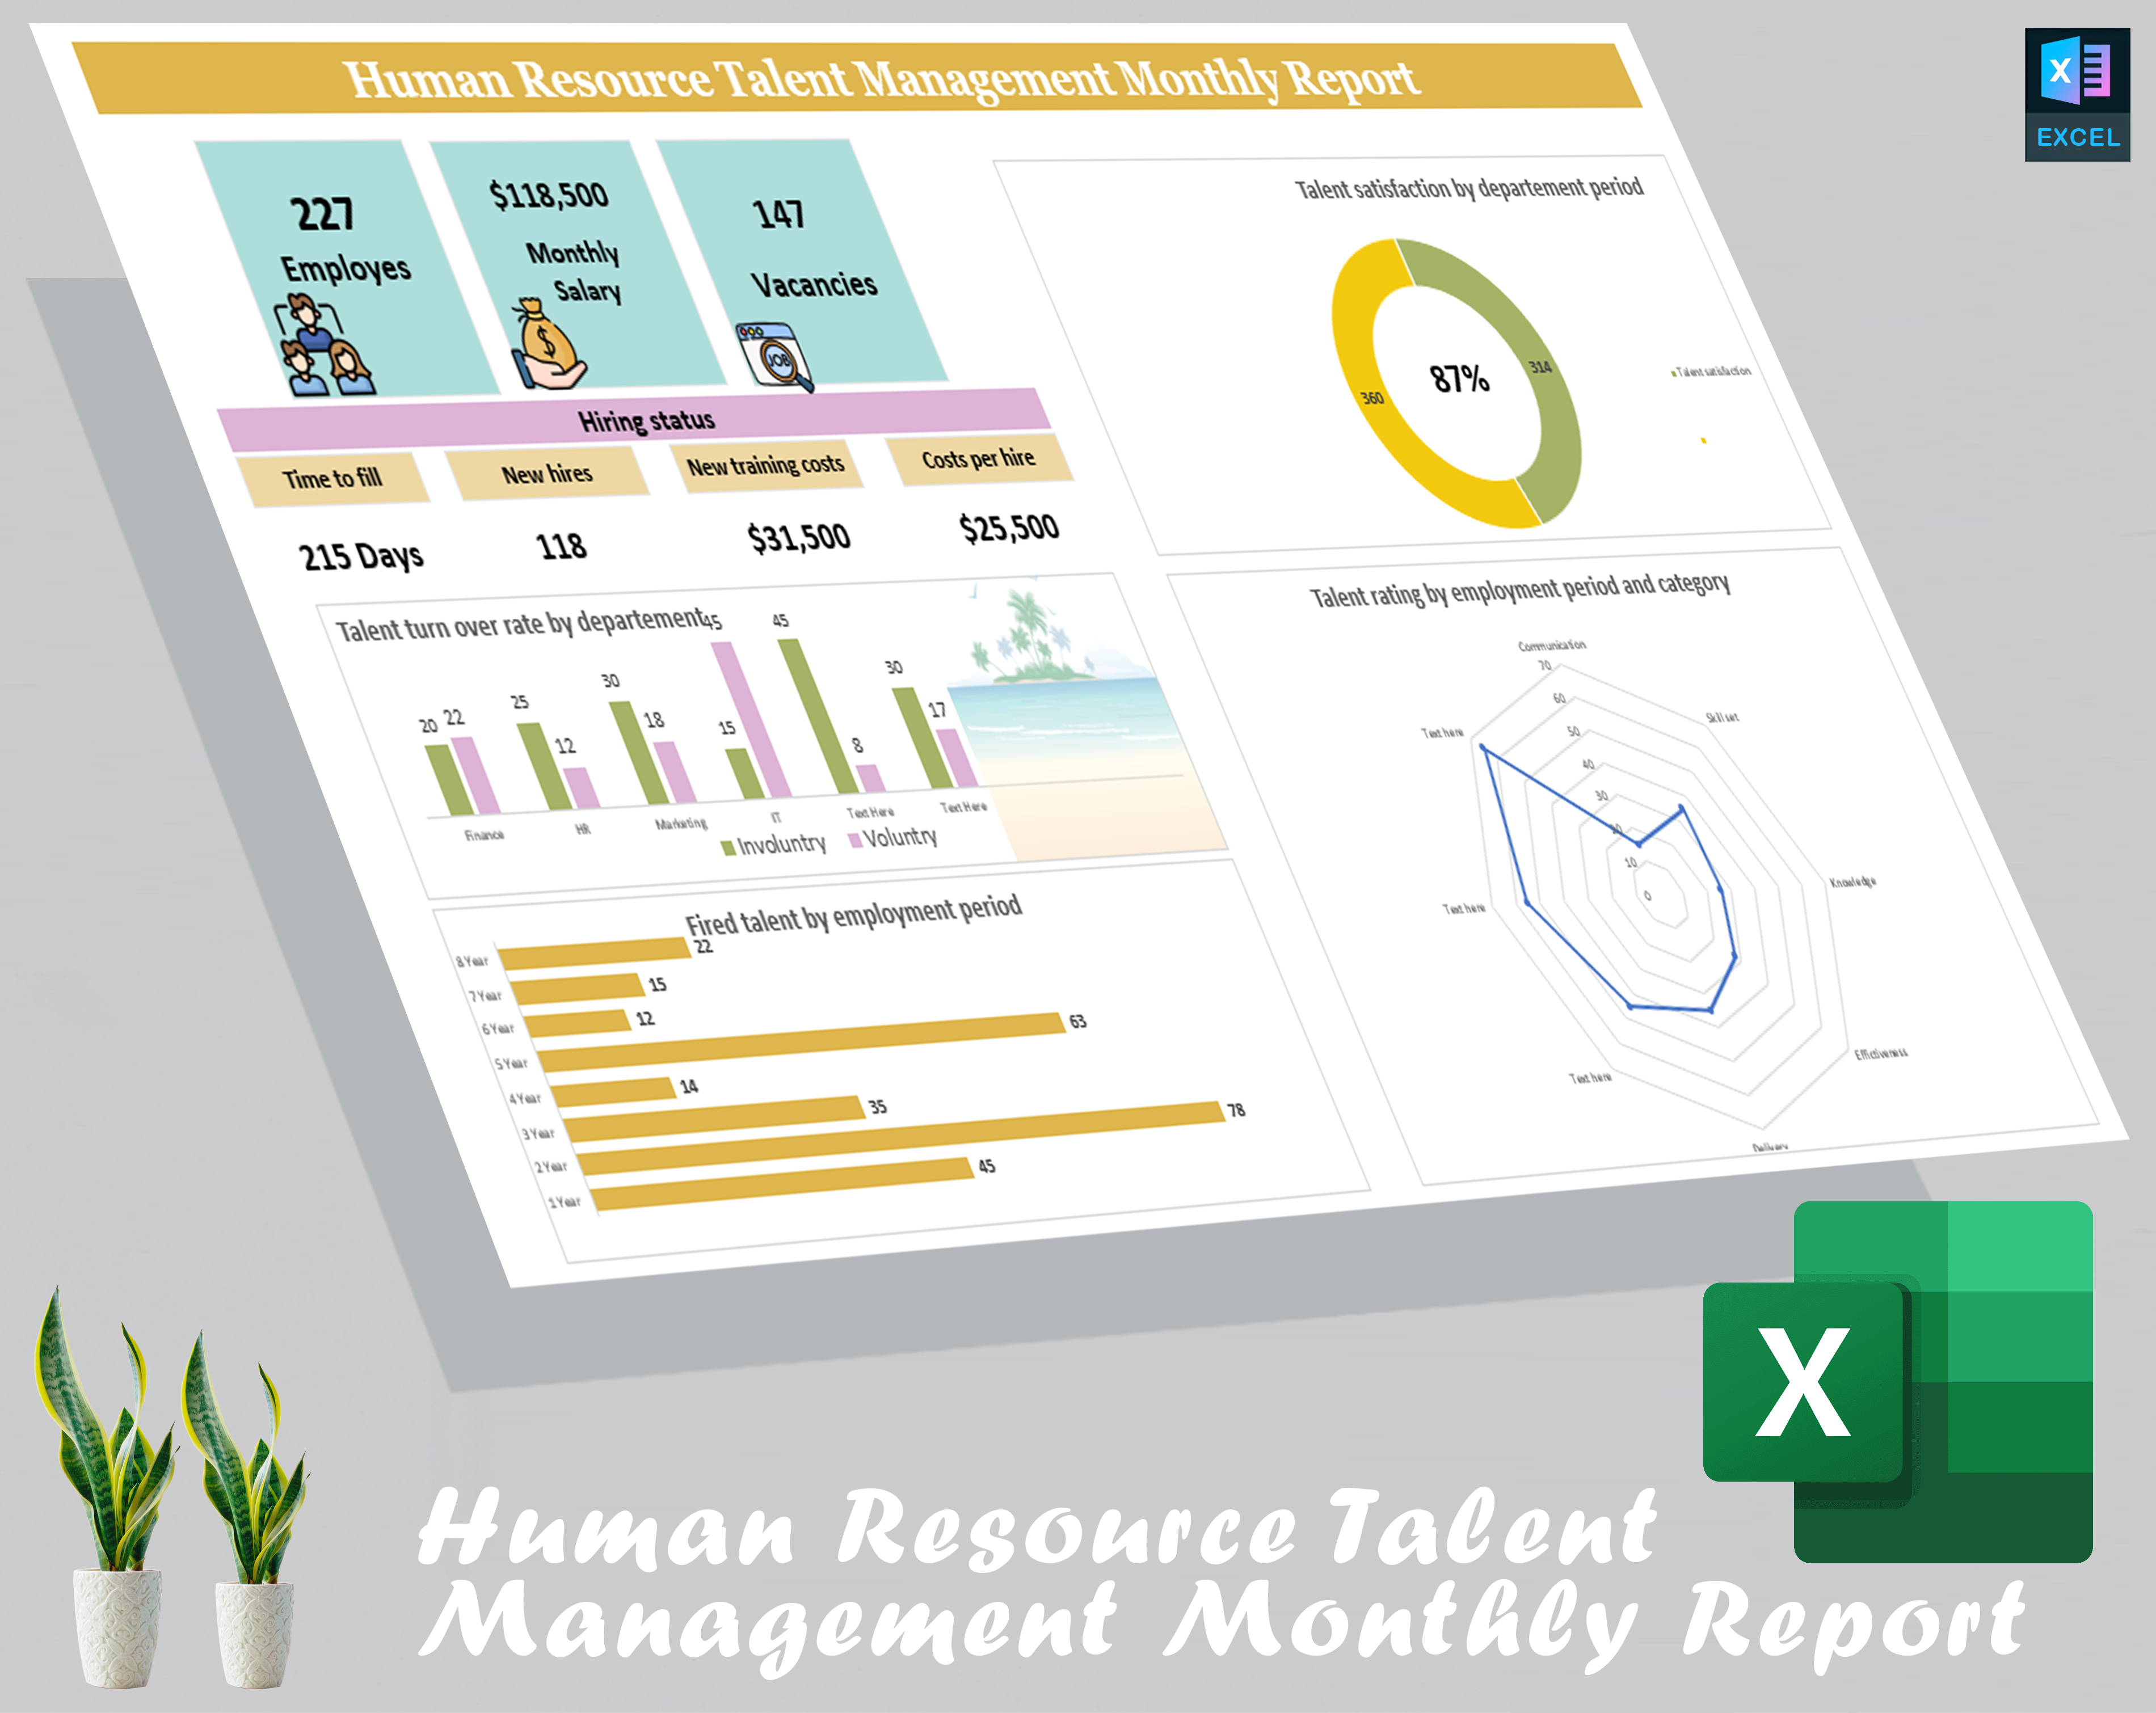 Human Resource Talent Management Monthly Report